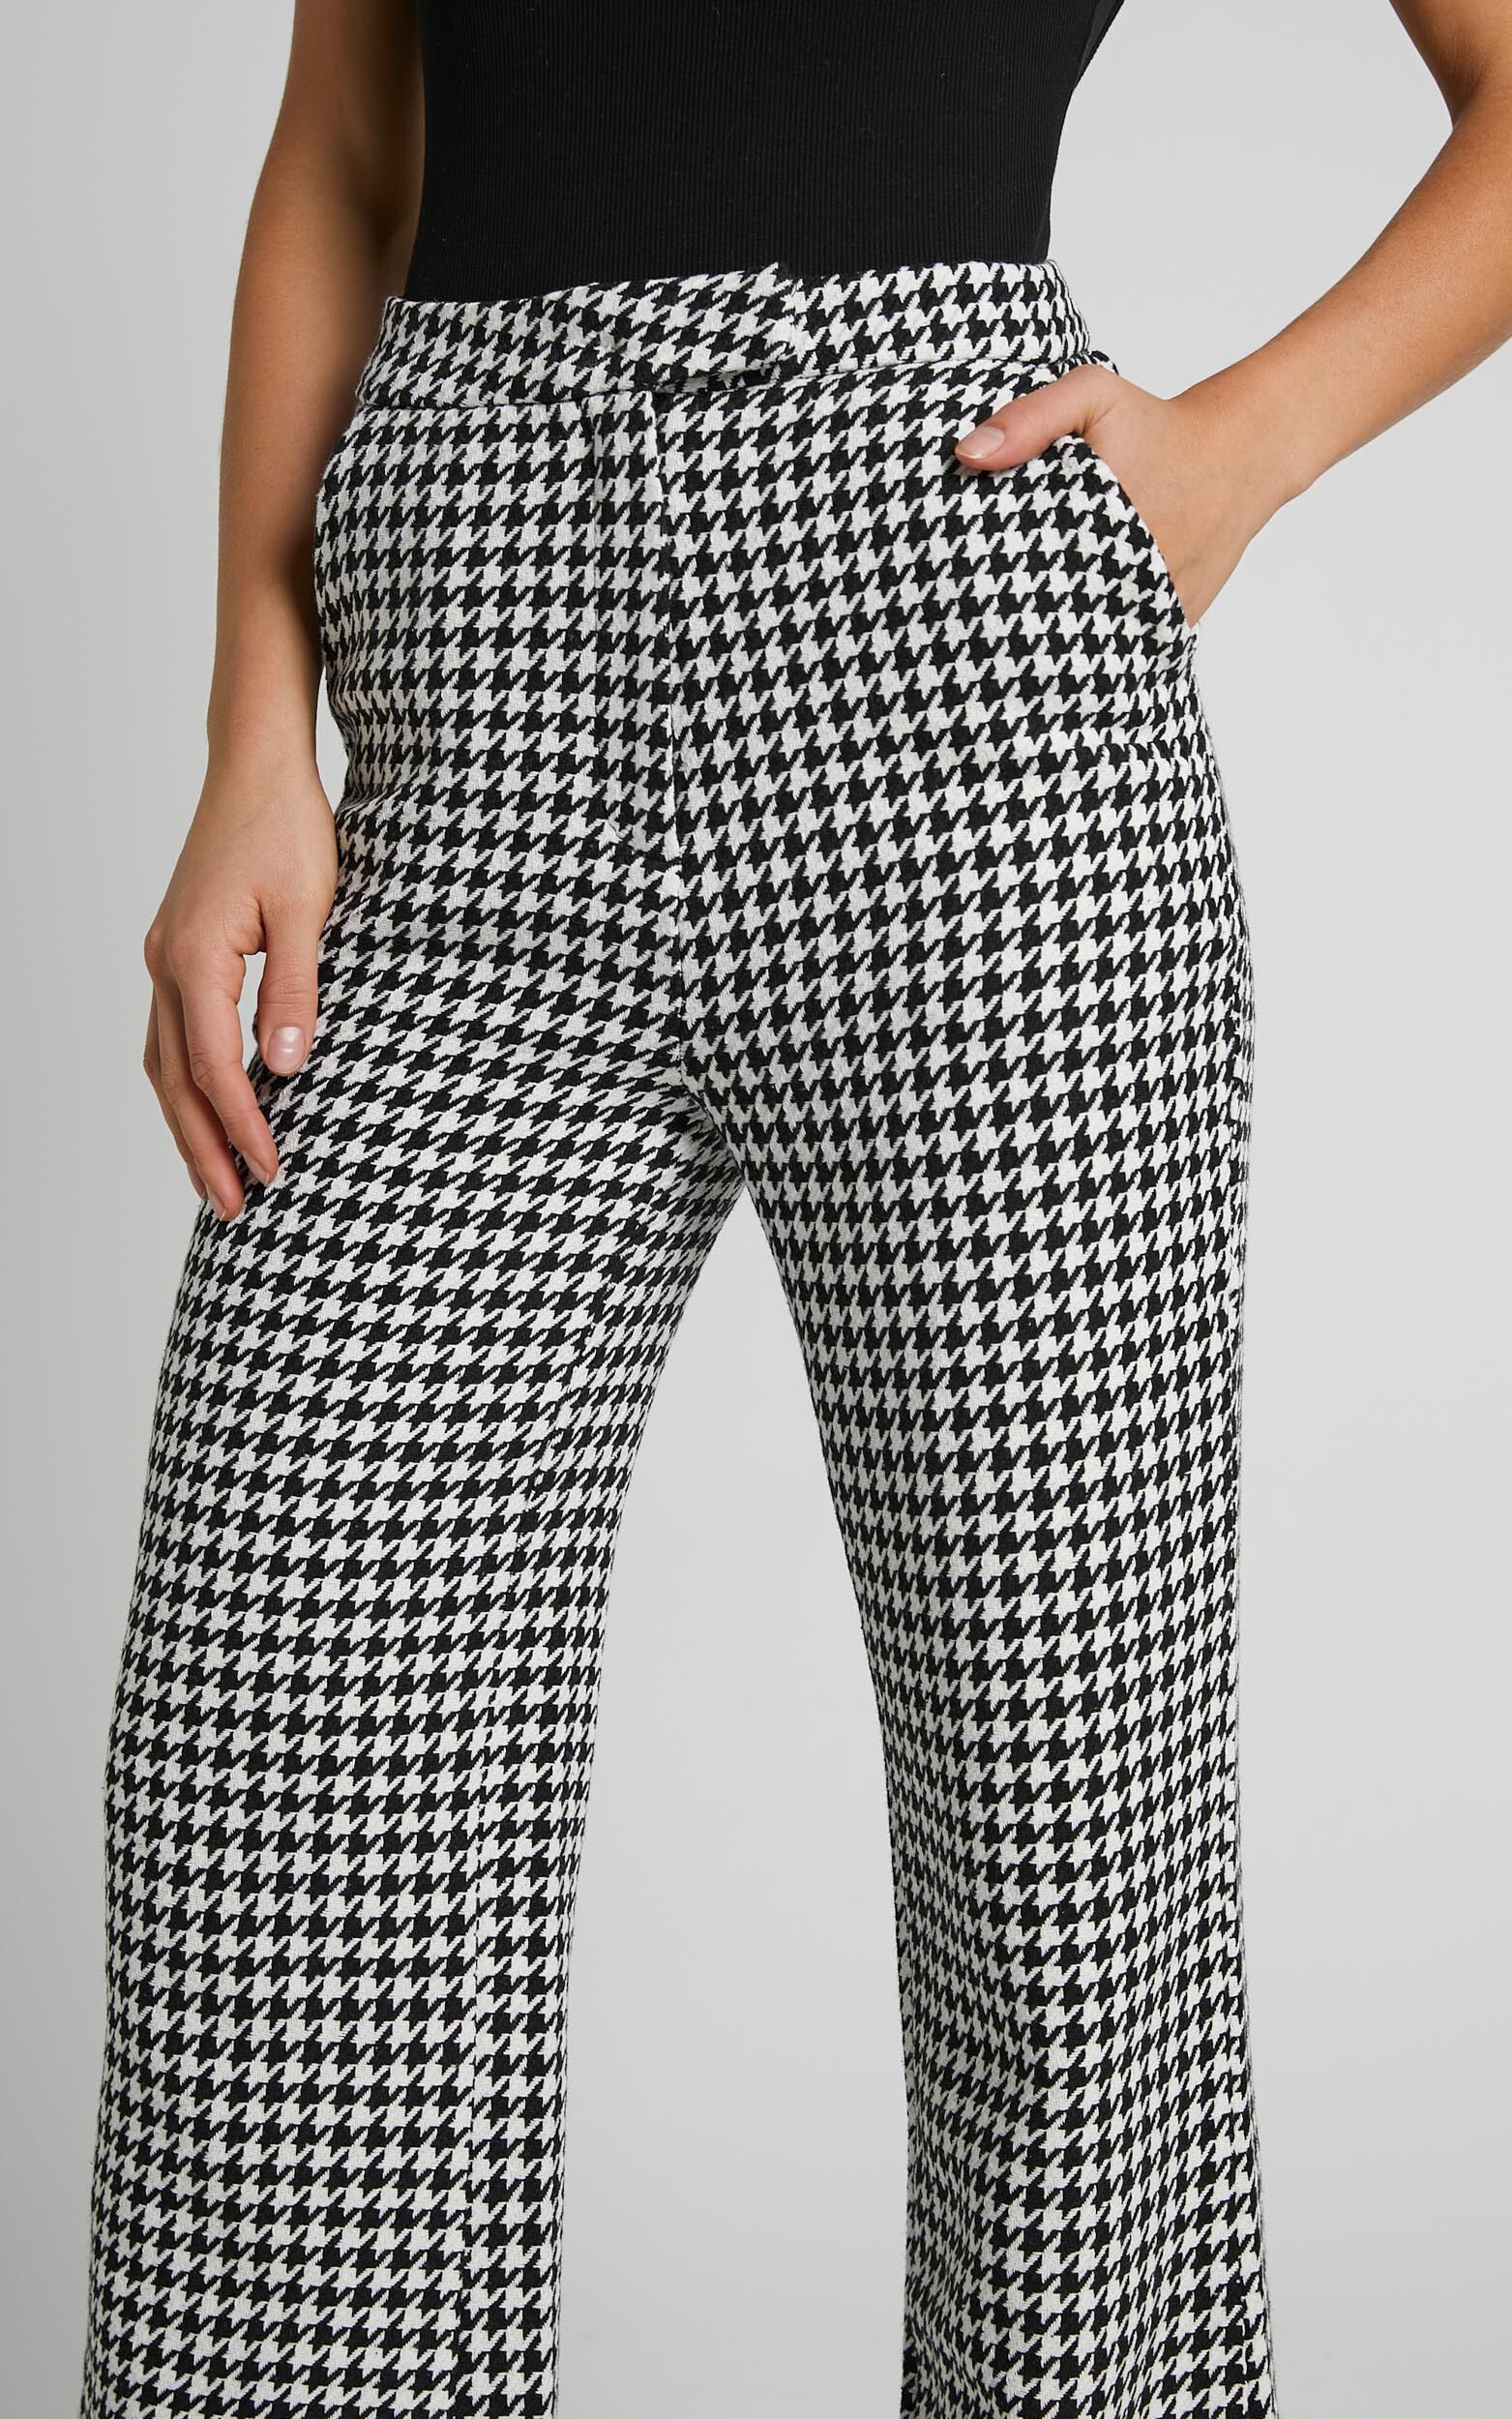 Minie Pants - High Waisted Tailored Split Leg Pants in Black and White ...